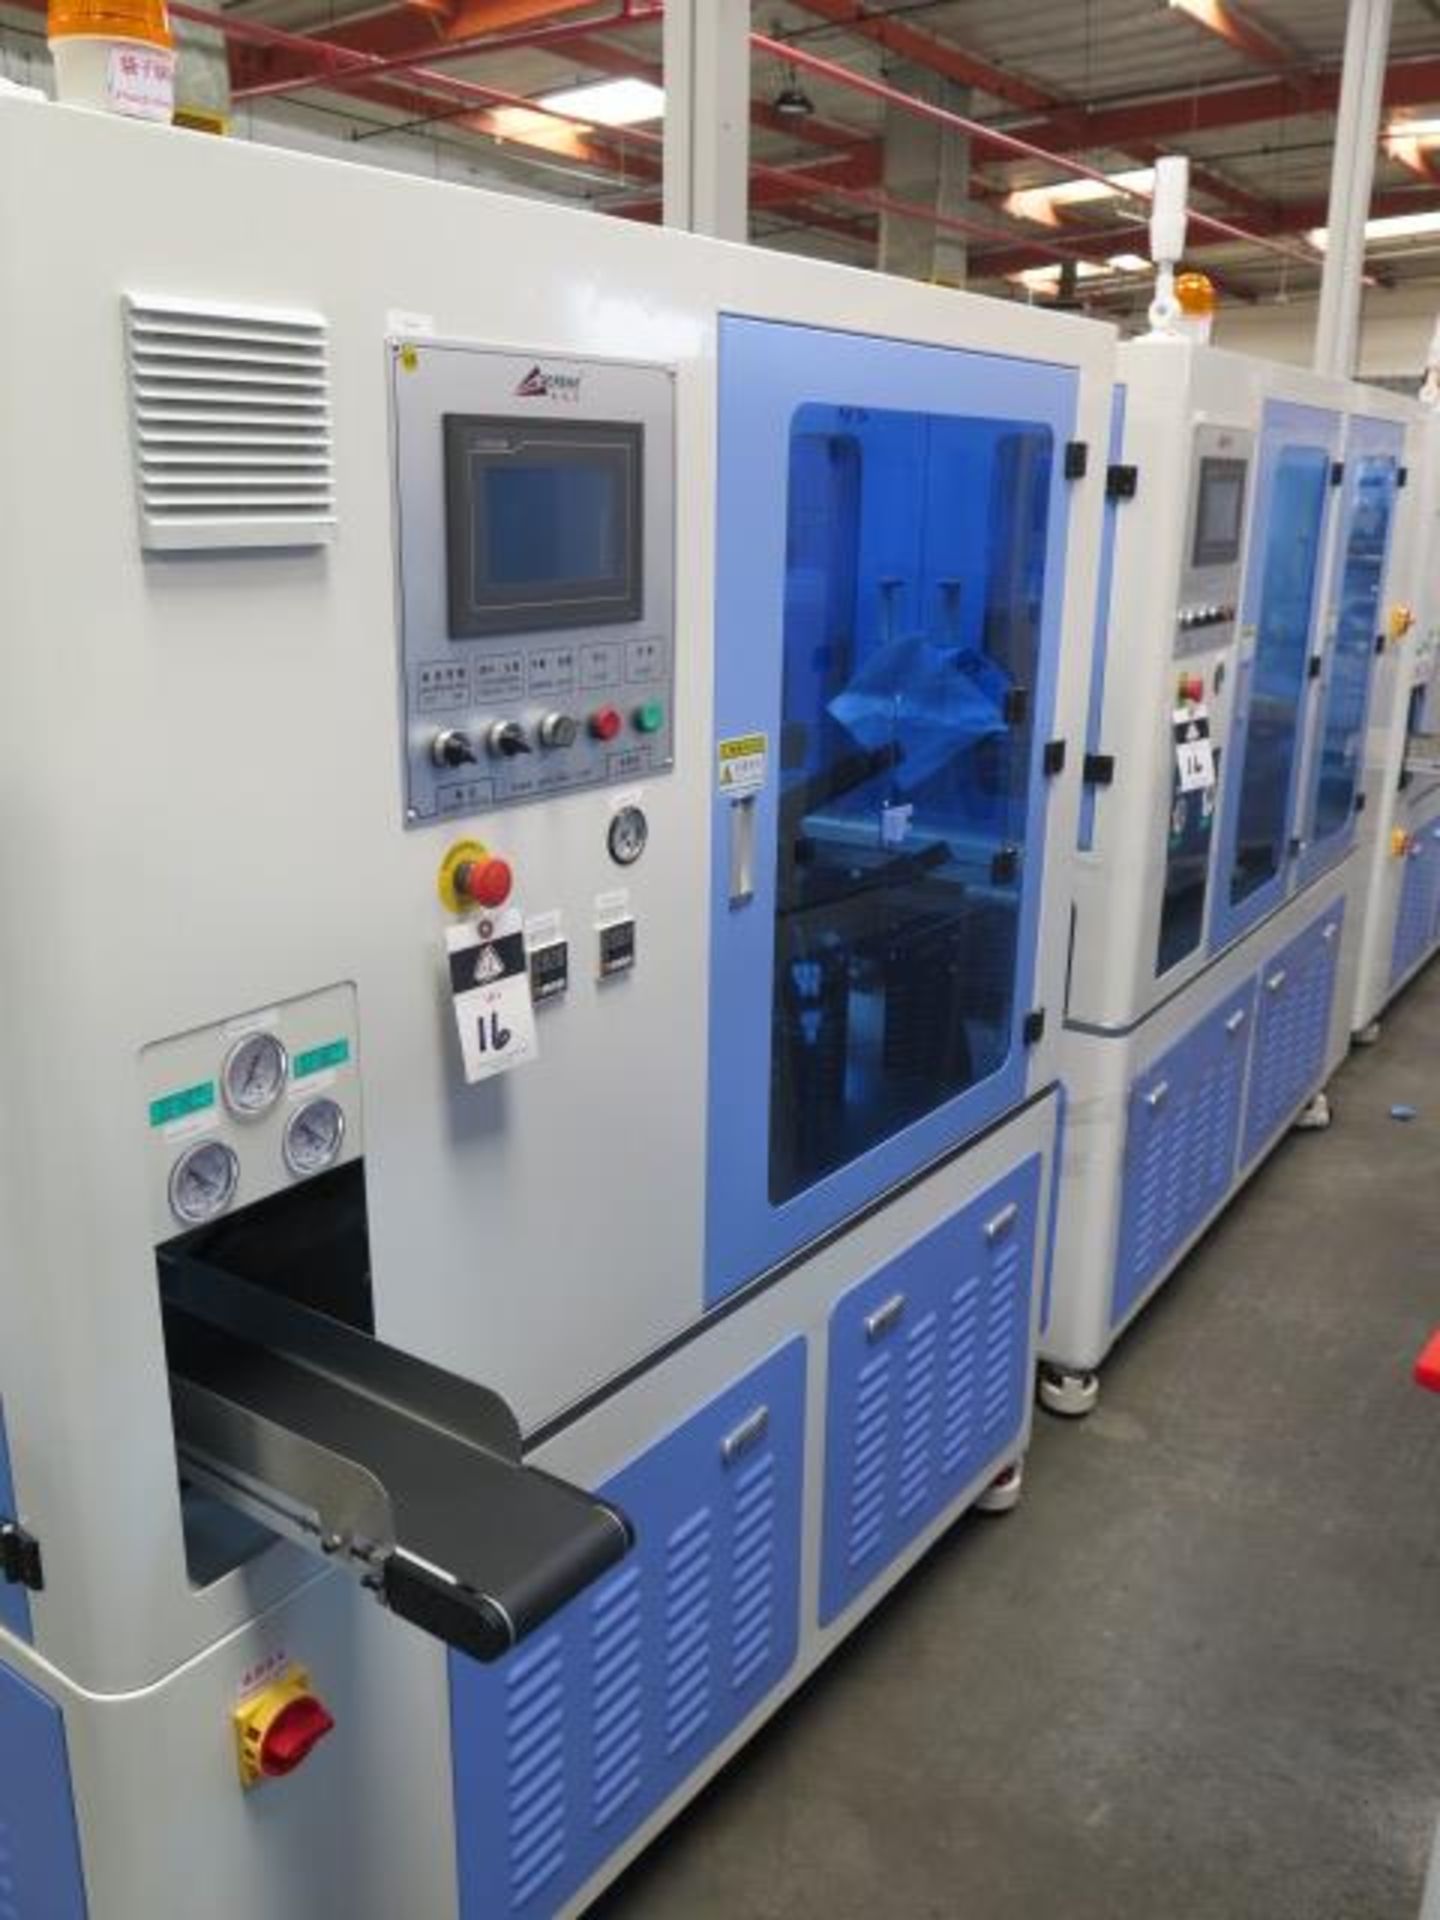 2/2021 Gereke mdl. GRK-TWO1 Cassette Assembly and Packaging Line s/n GRK20210227045, SOLD AS IS